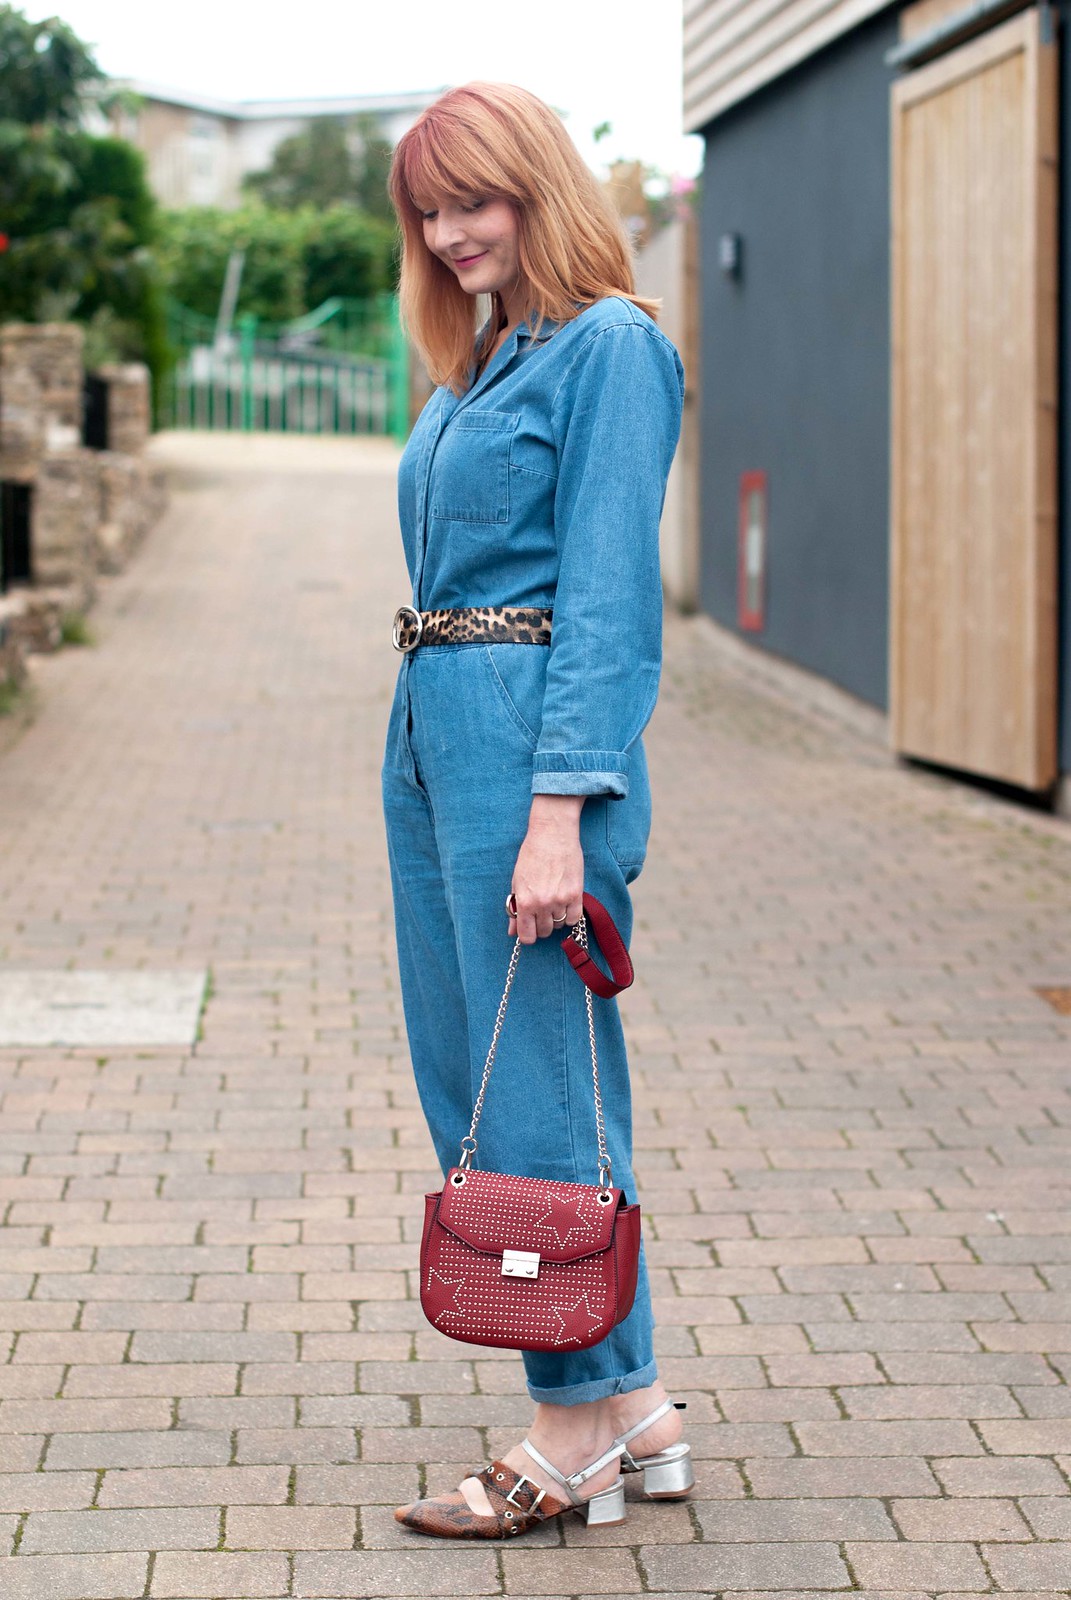 How to style a denim jumpsuit / boilersuit for the summer leopard print belt red studded crossbody bag pointed toe snakeskin Finery flats | Not Dressed As Lamb, over 40 style